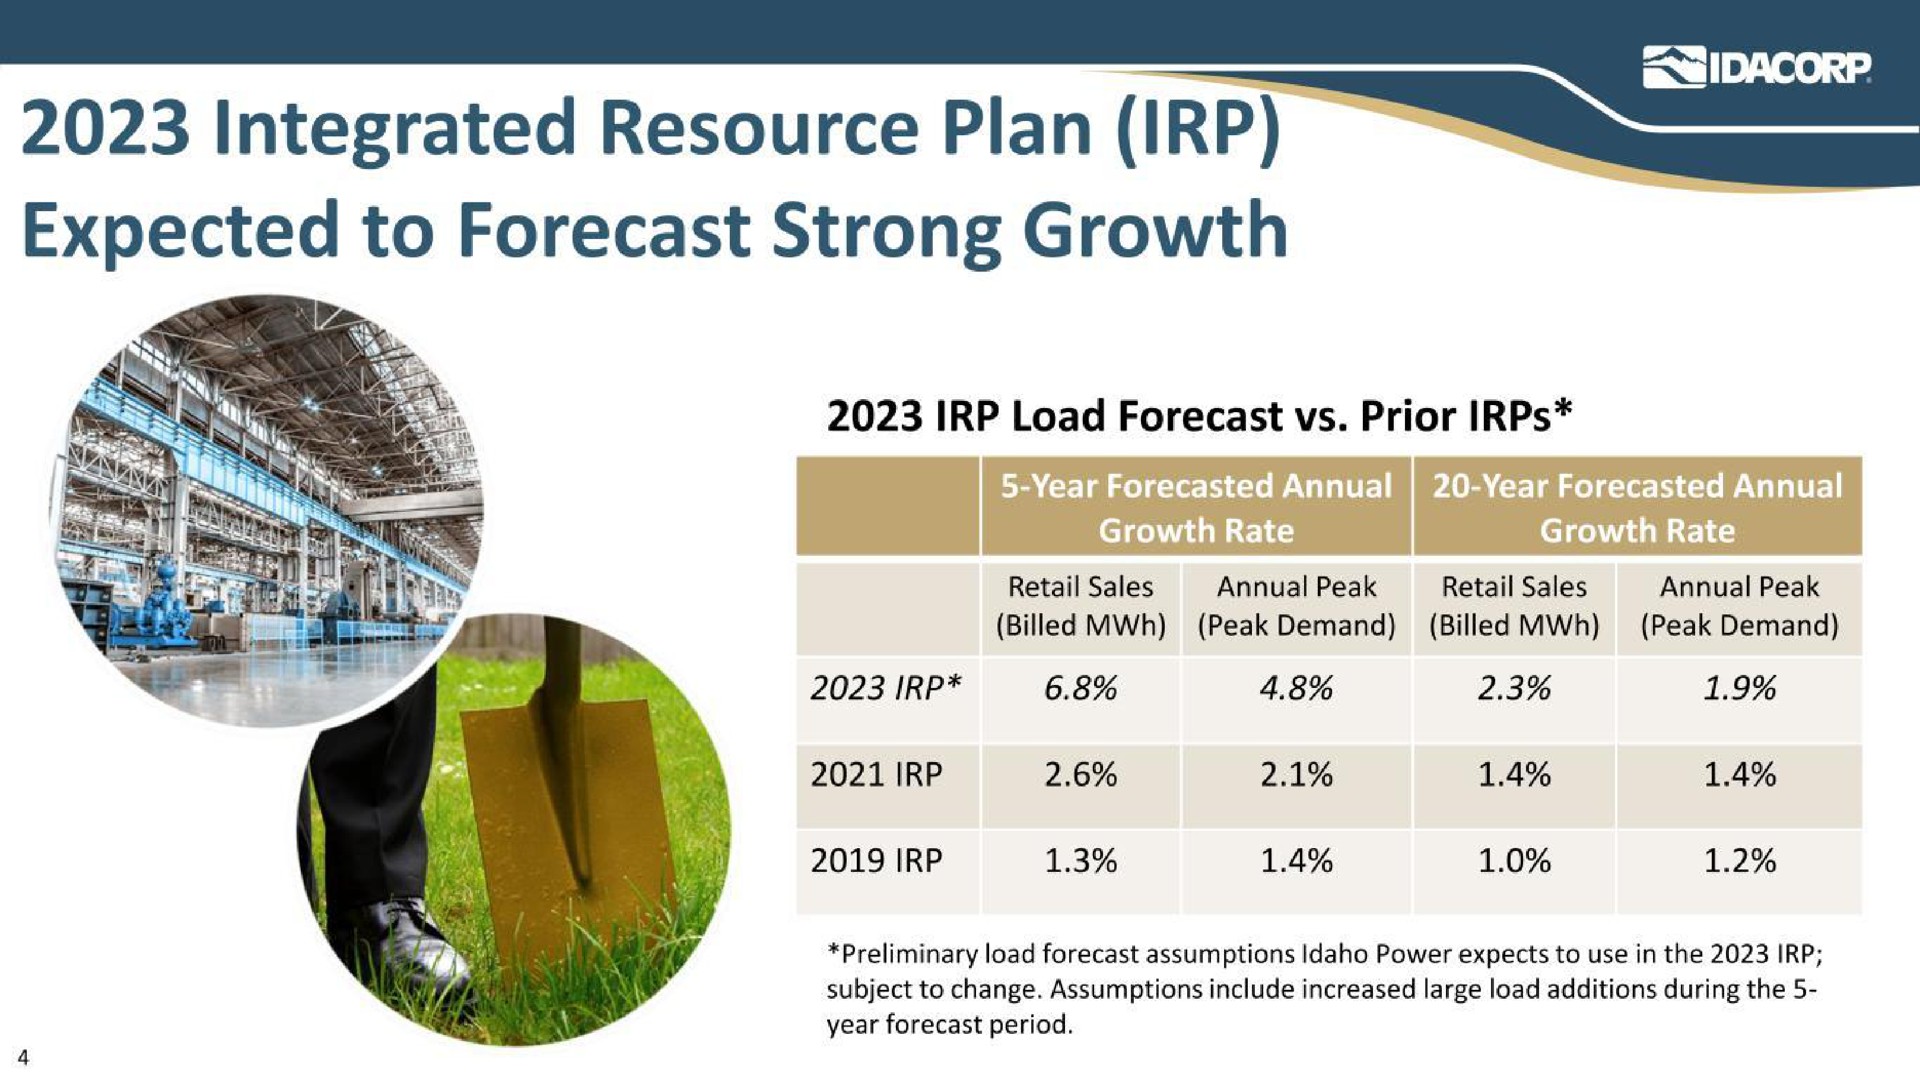 integrated resource plan expected to forecast strong growth | Idacorp